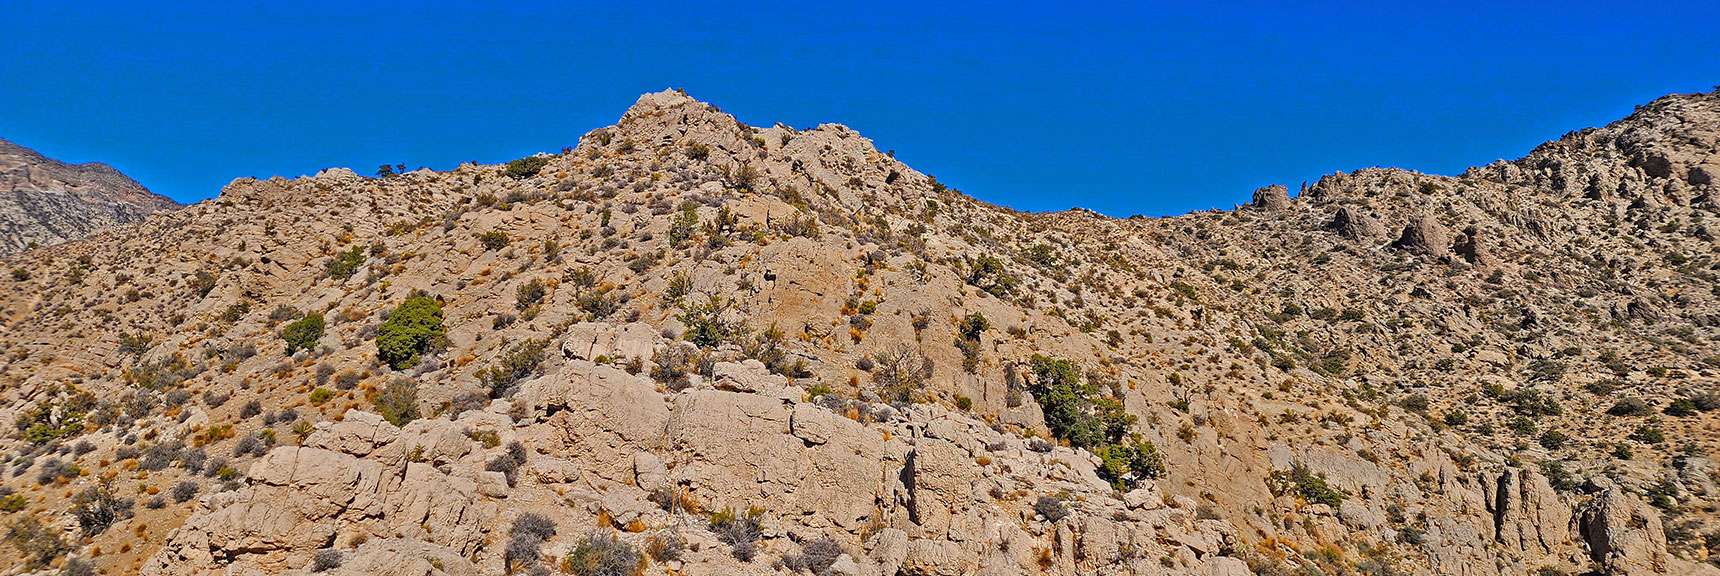 Ascending Center of Ridgeline. Saddle to Right. More Gradual Than Gully Below. | Turtlehead Peak | Red Rock Canyon National Conservation Area, Nevada